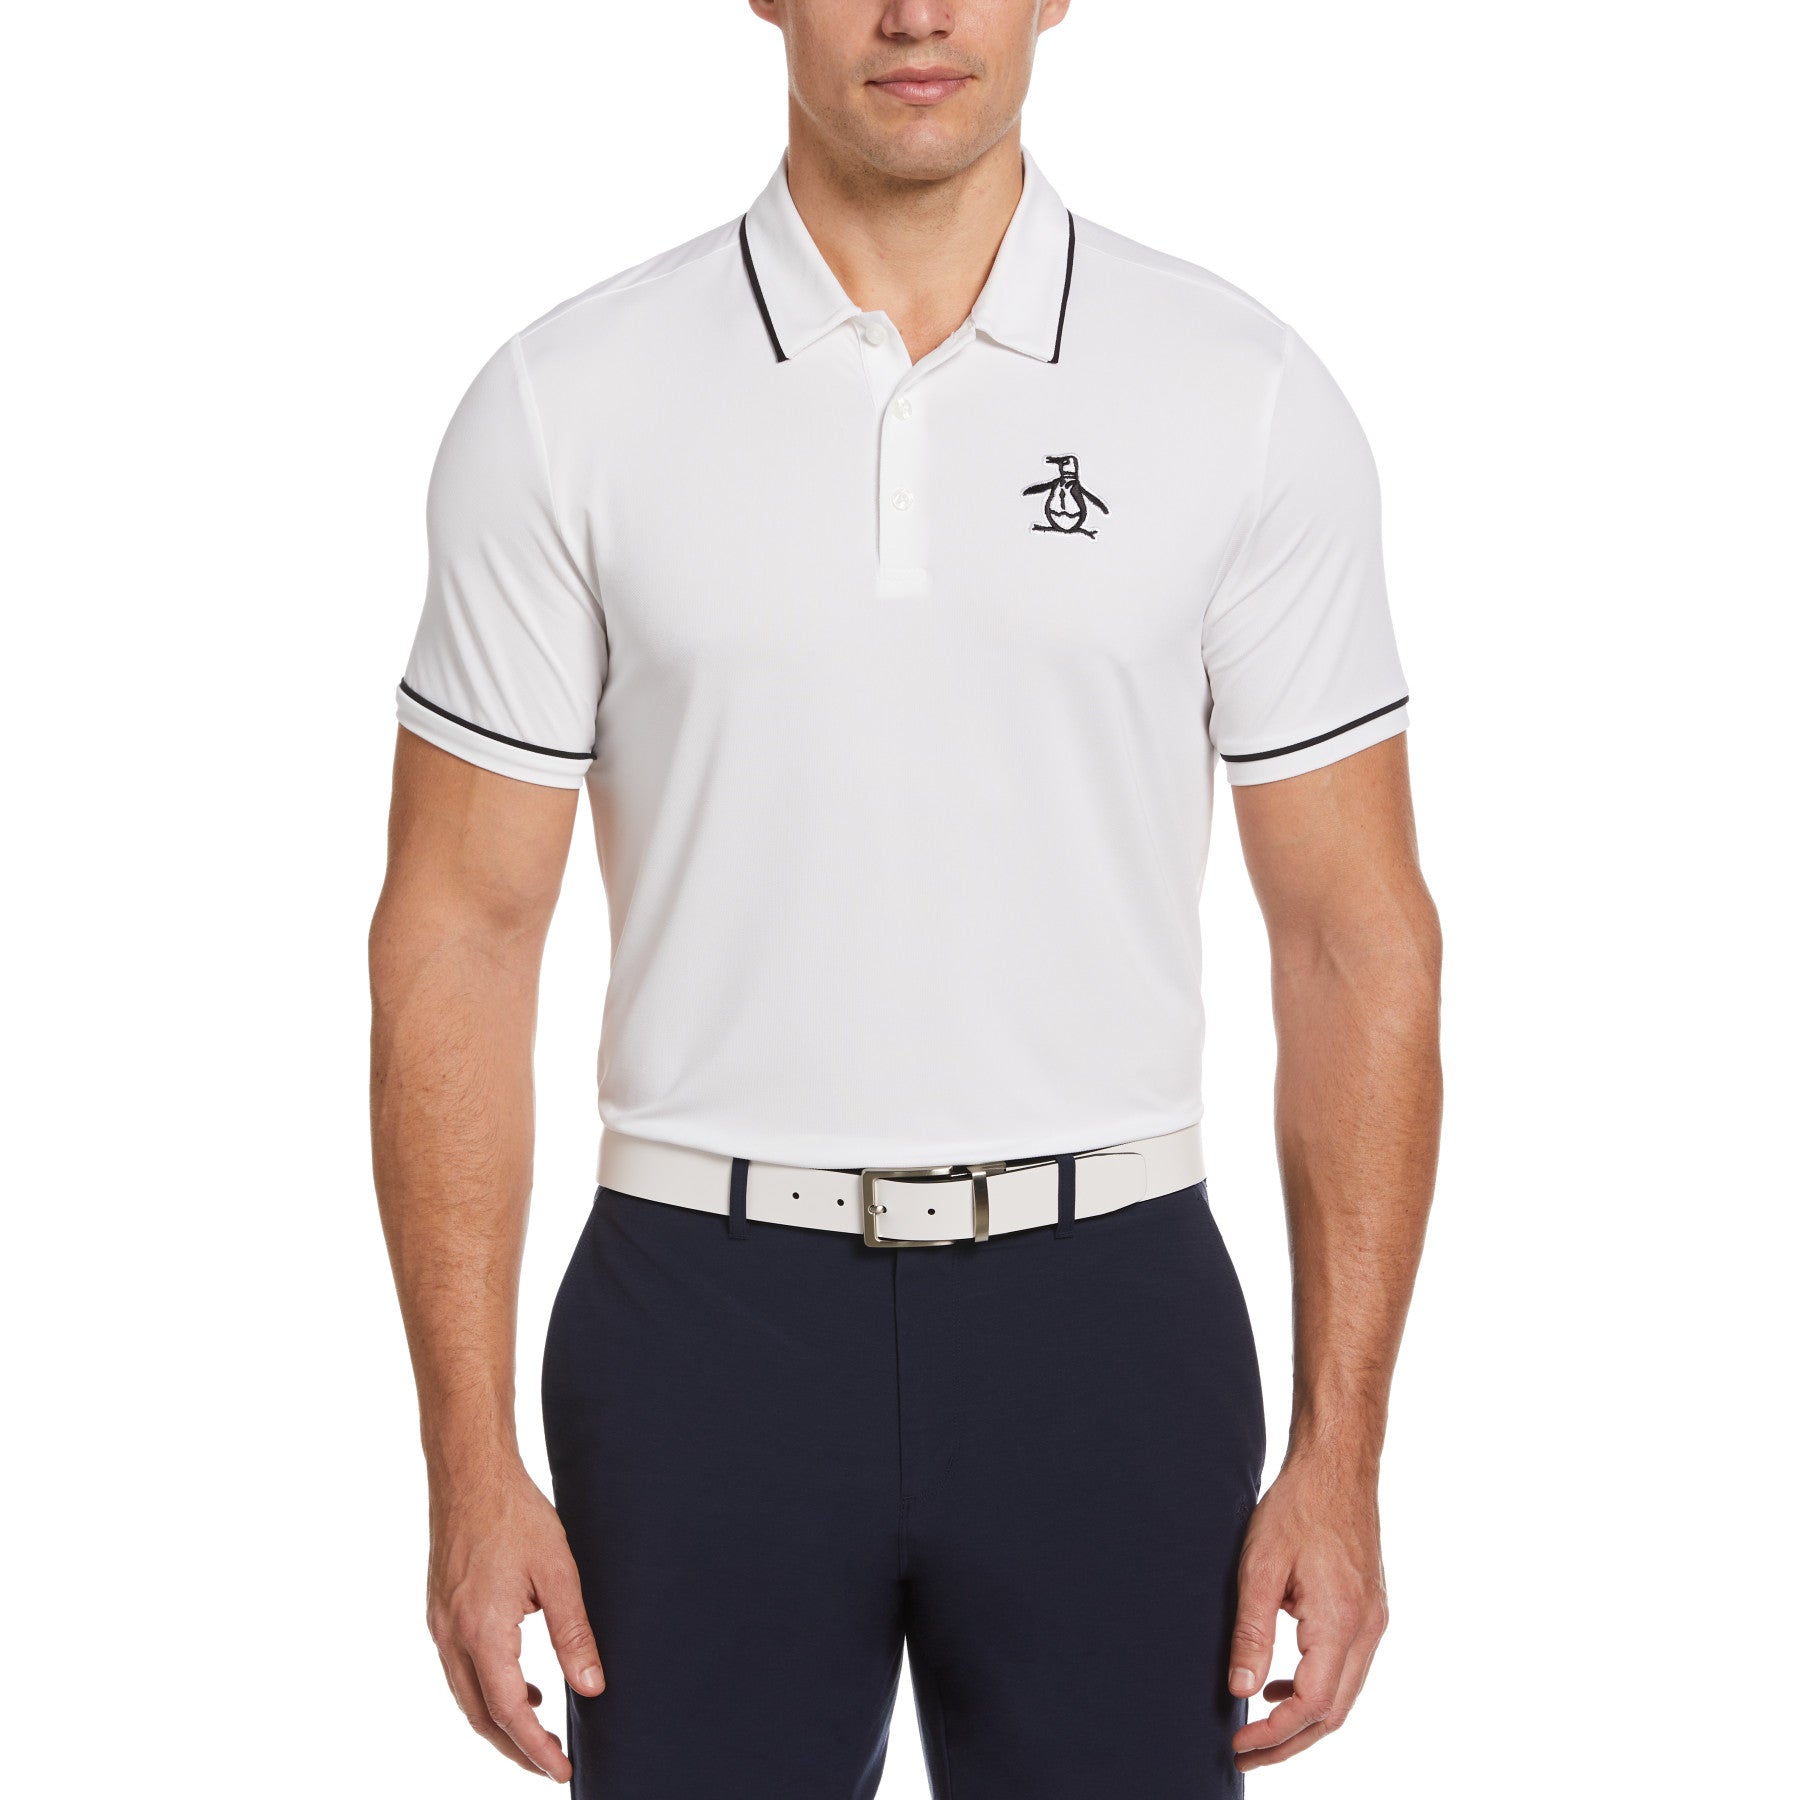 View Original Penguin Pete Tipped Golf Polo Shirt In Bright White White Mens information